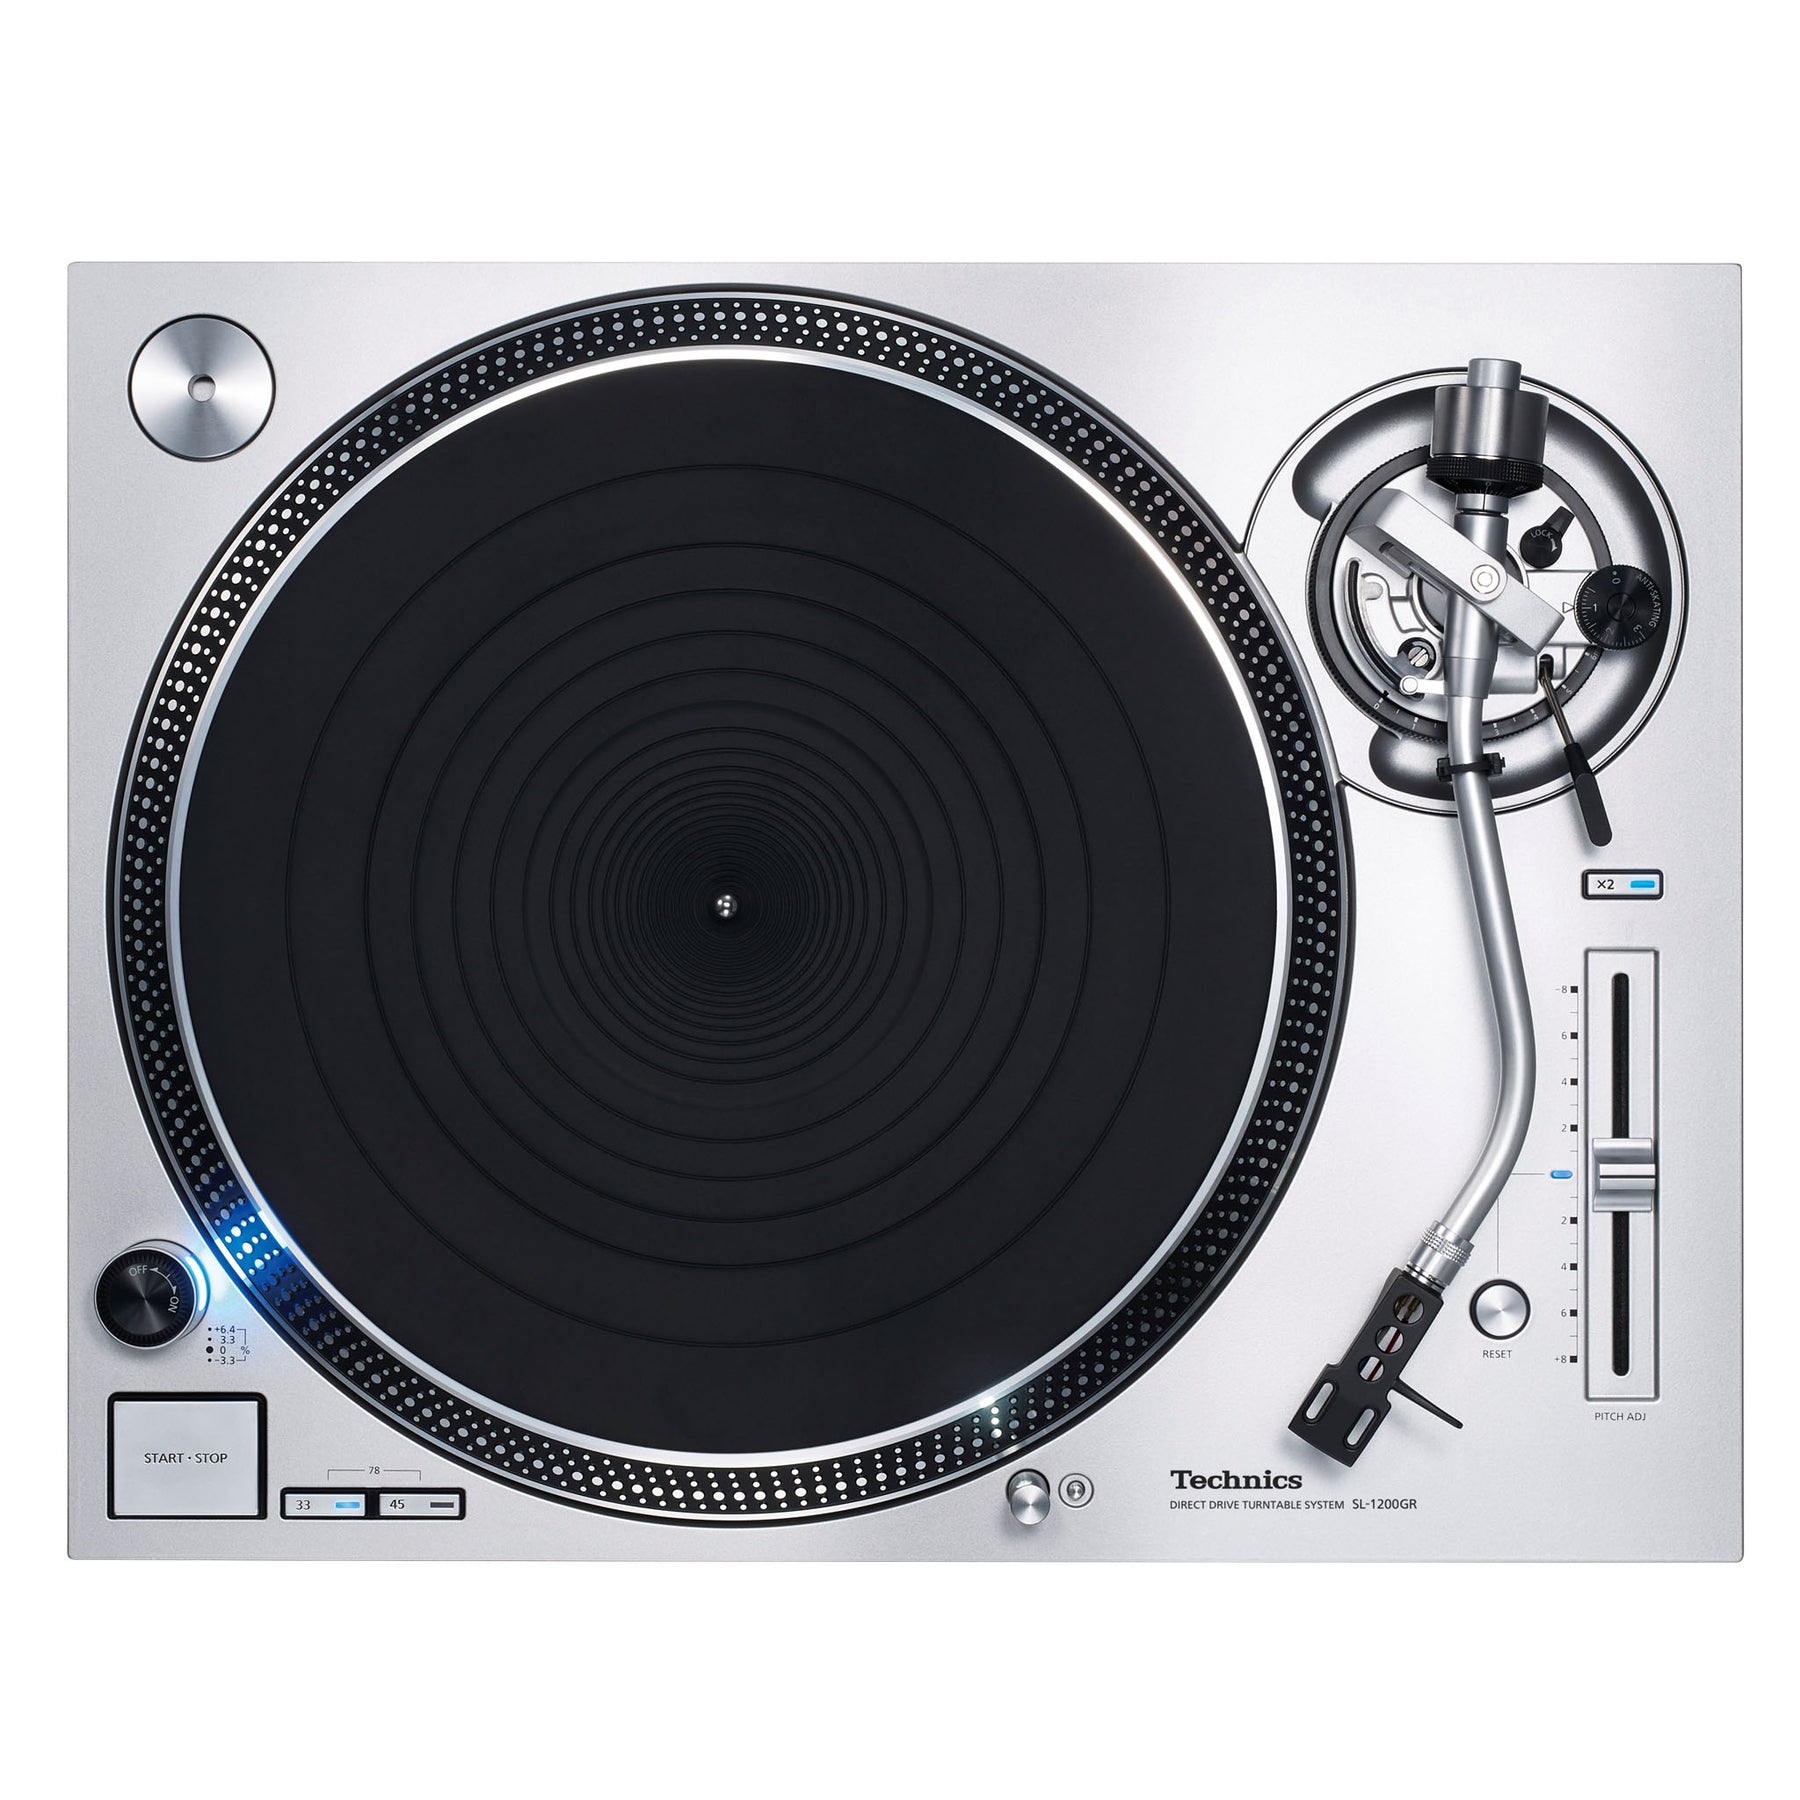 Direct Drive Turntable System SLGR